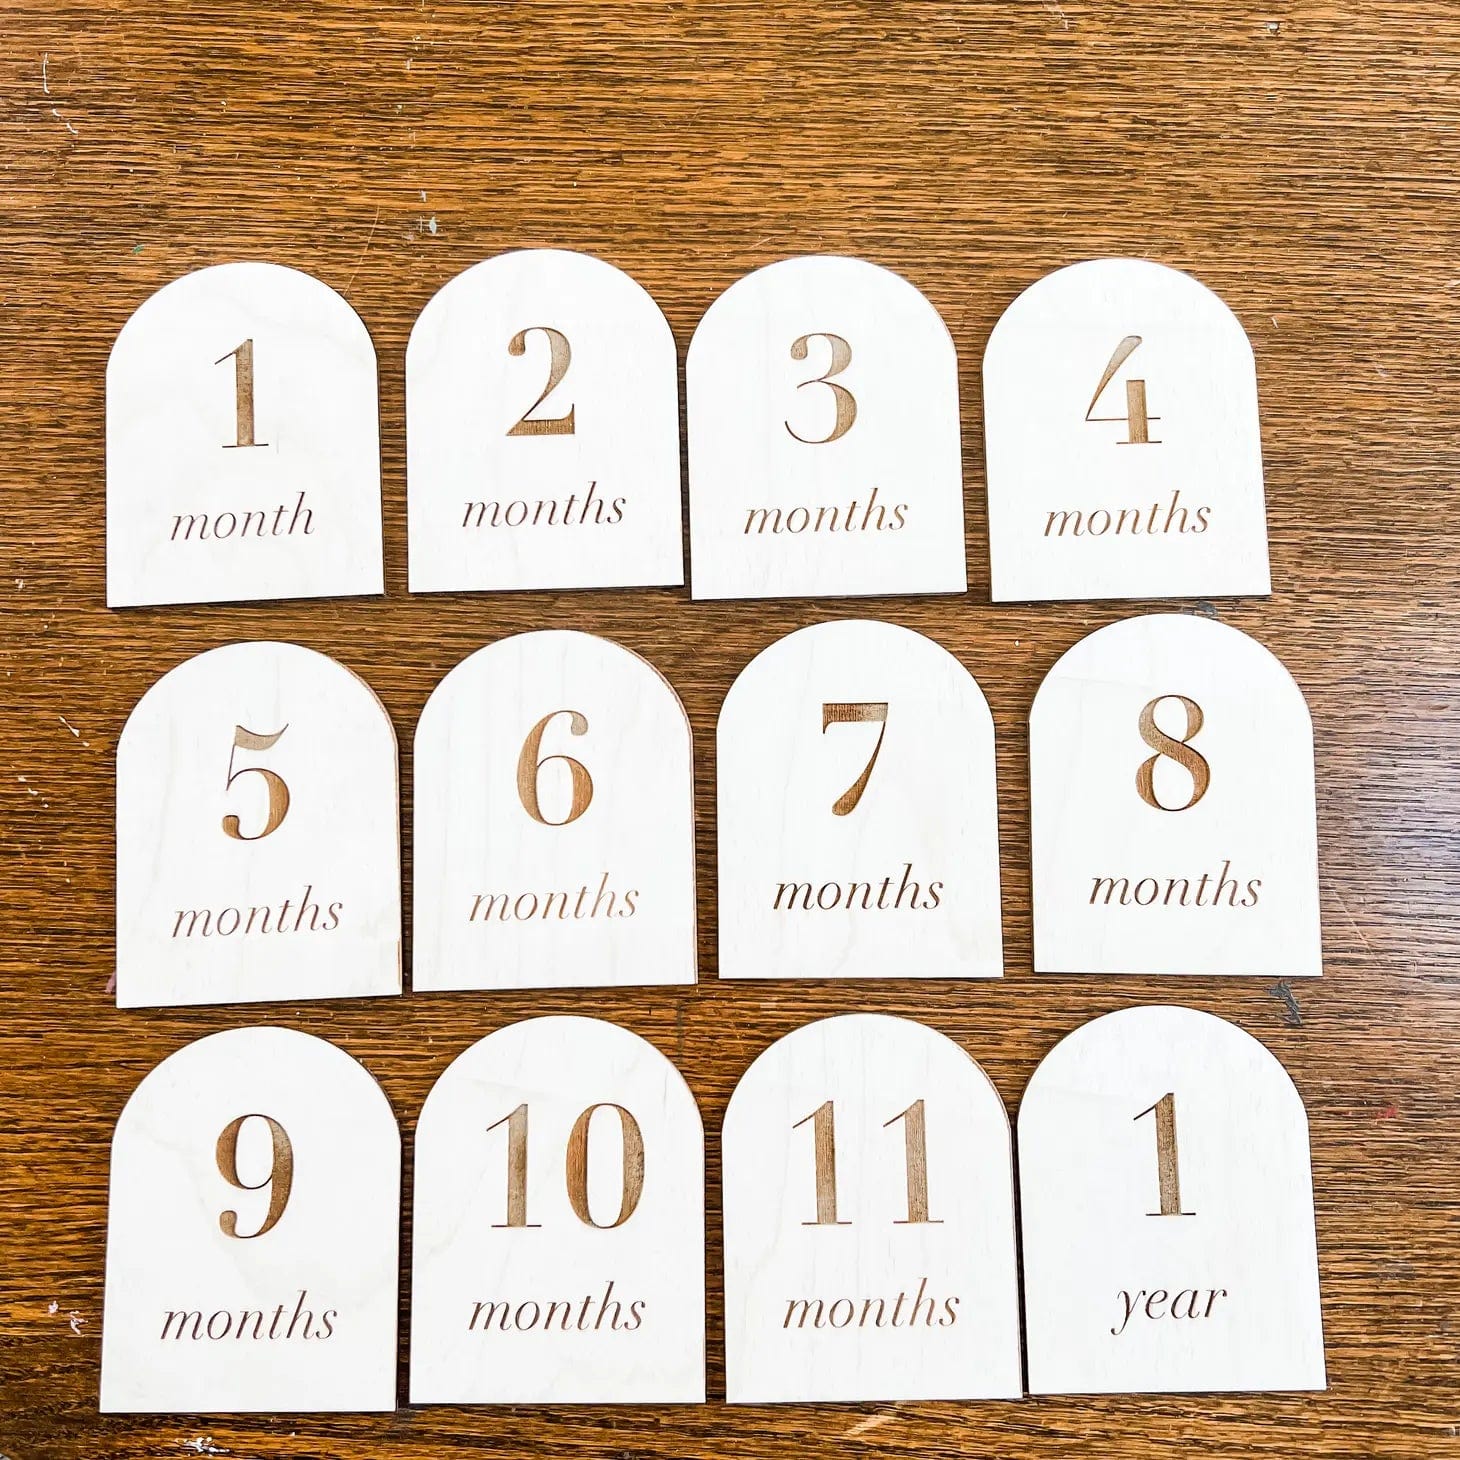 Emily Can Letter Arches Wooden Monthly Milestone Plaques Emily Can Letter Arches Wooden Monthly Milestone Plaques